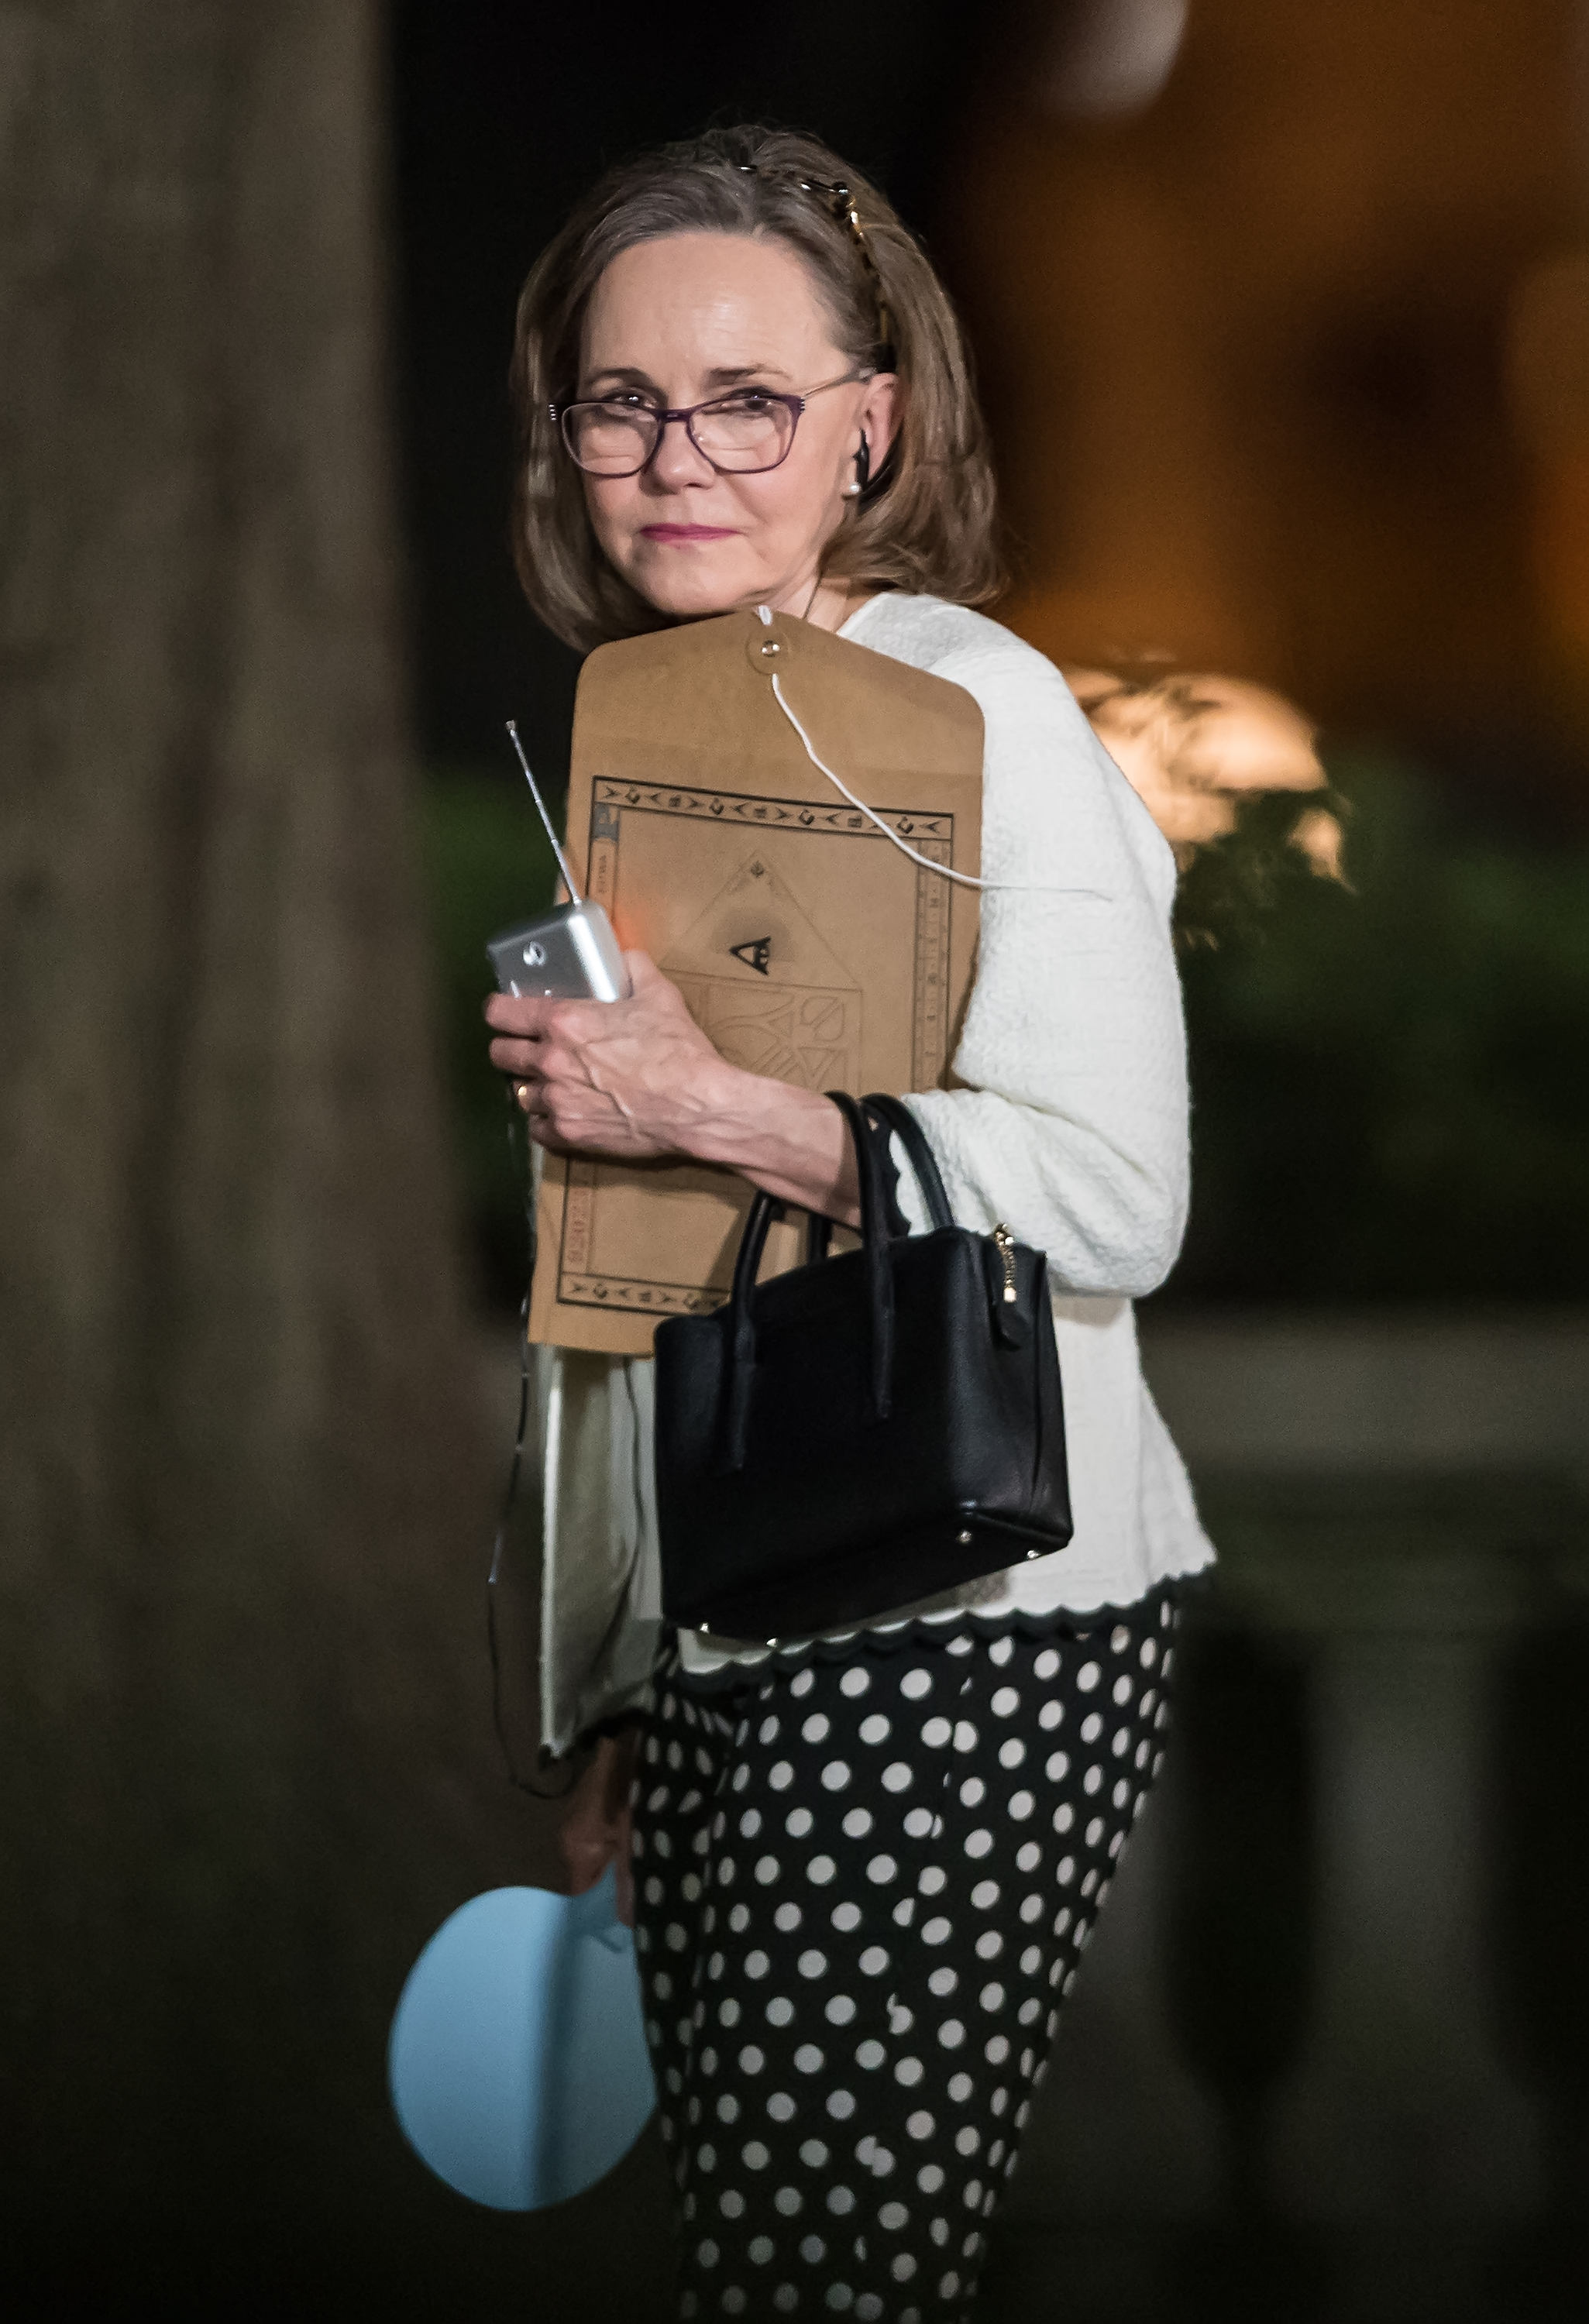 Sally Field pictured on the set of the series, "Dispatches from Elsewhere" on July 27, 2019 in Philadelphia | Source: Getty Images